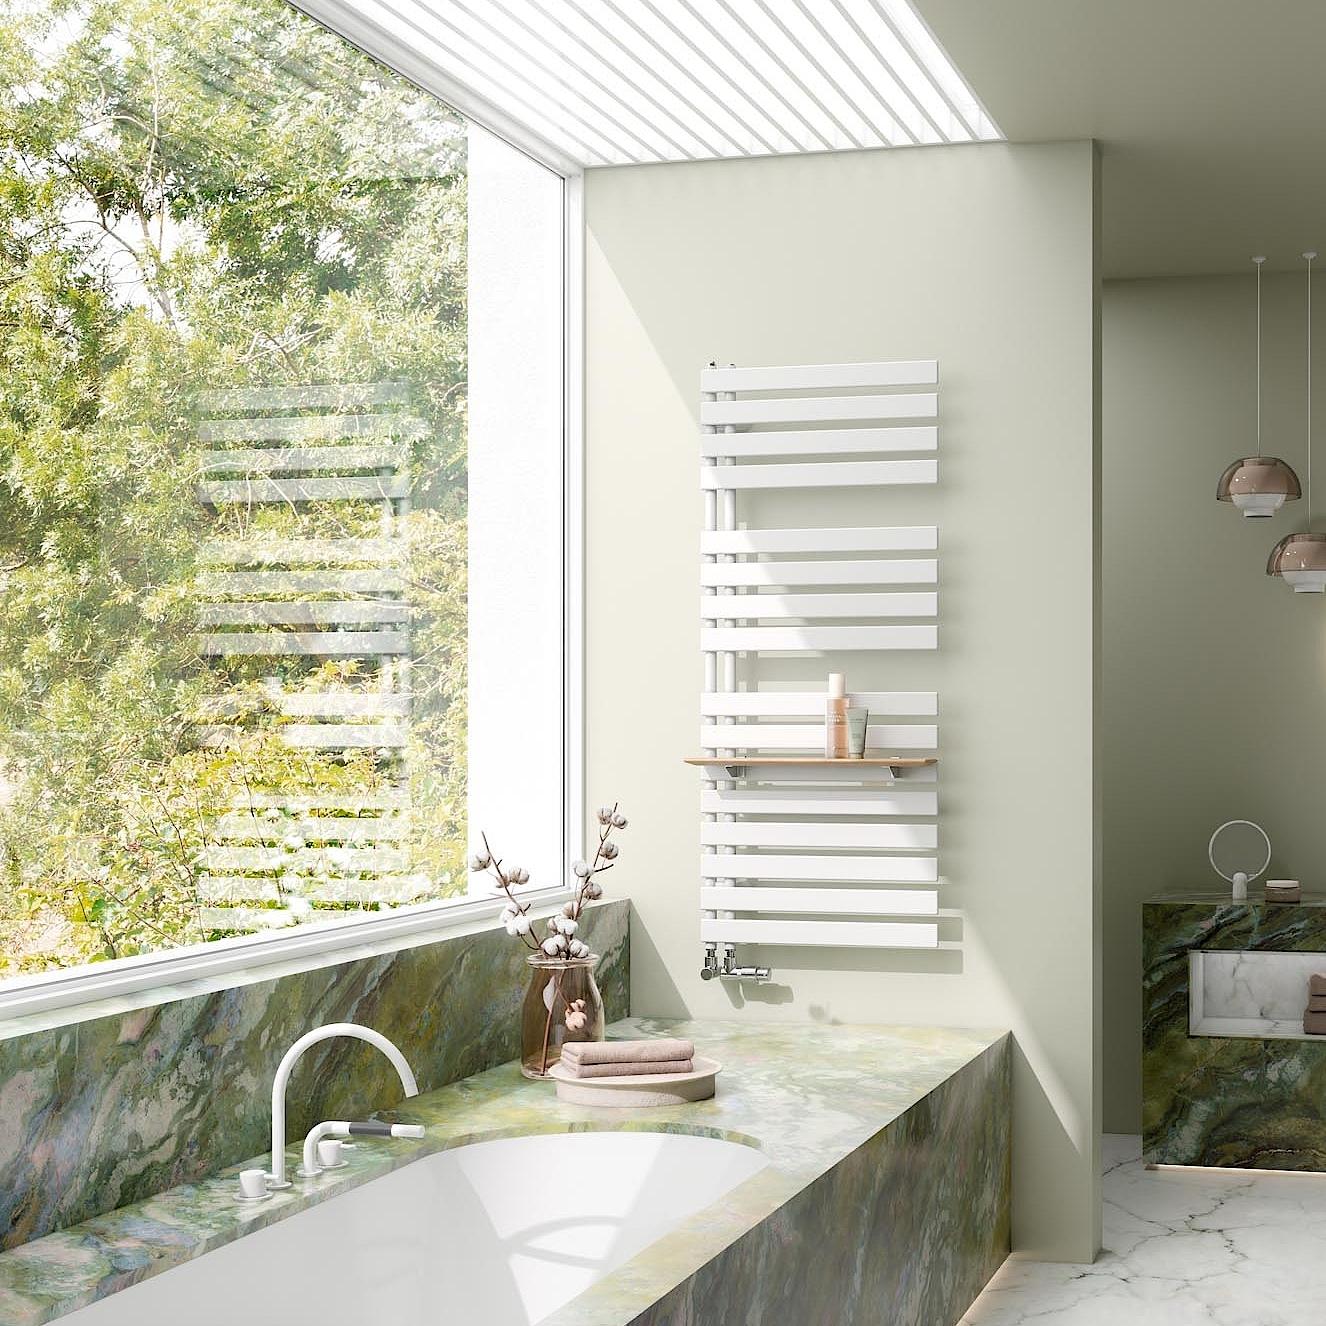 Kermi Credo Half flat design and bathroom radiators – open at the side, with flat transverse pipes.